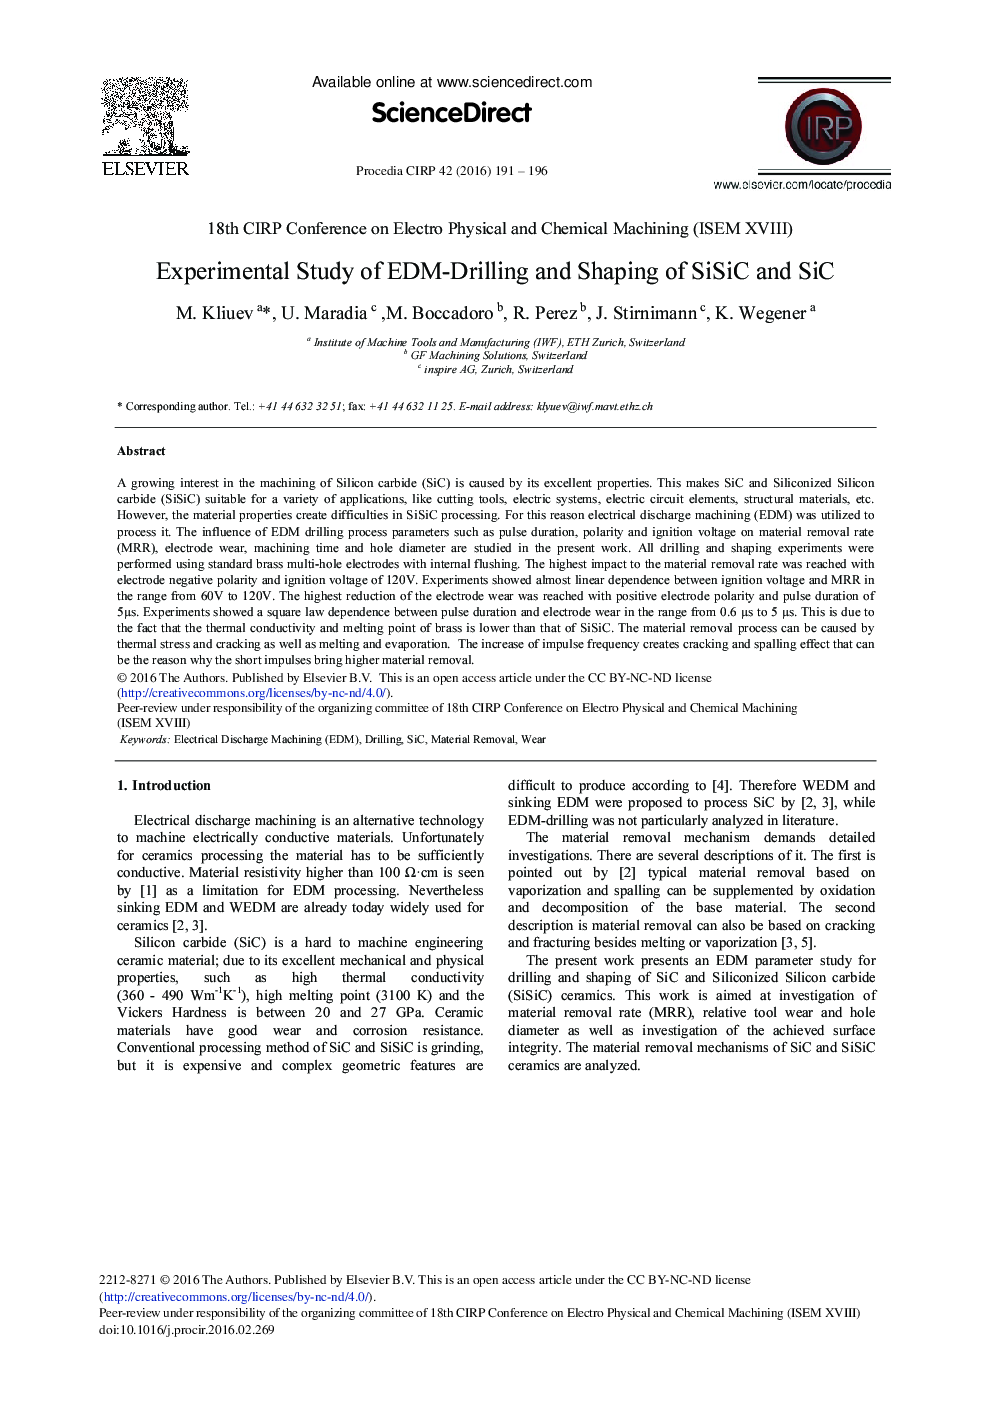 Experimental Study of EDM-Drilling and Shaping of SiSiC and SiC 